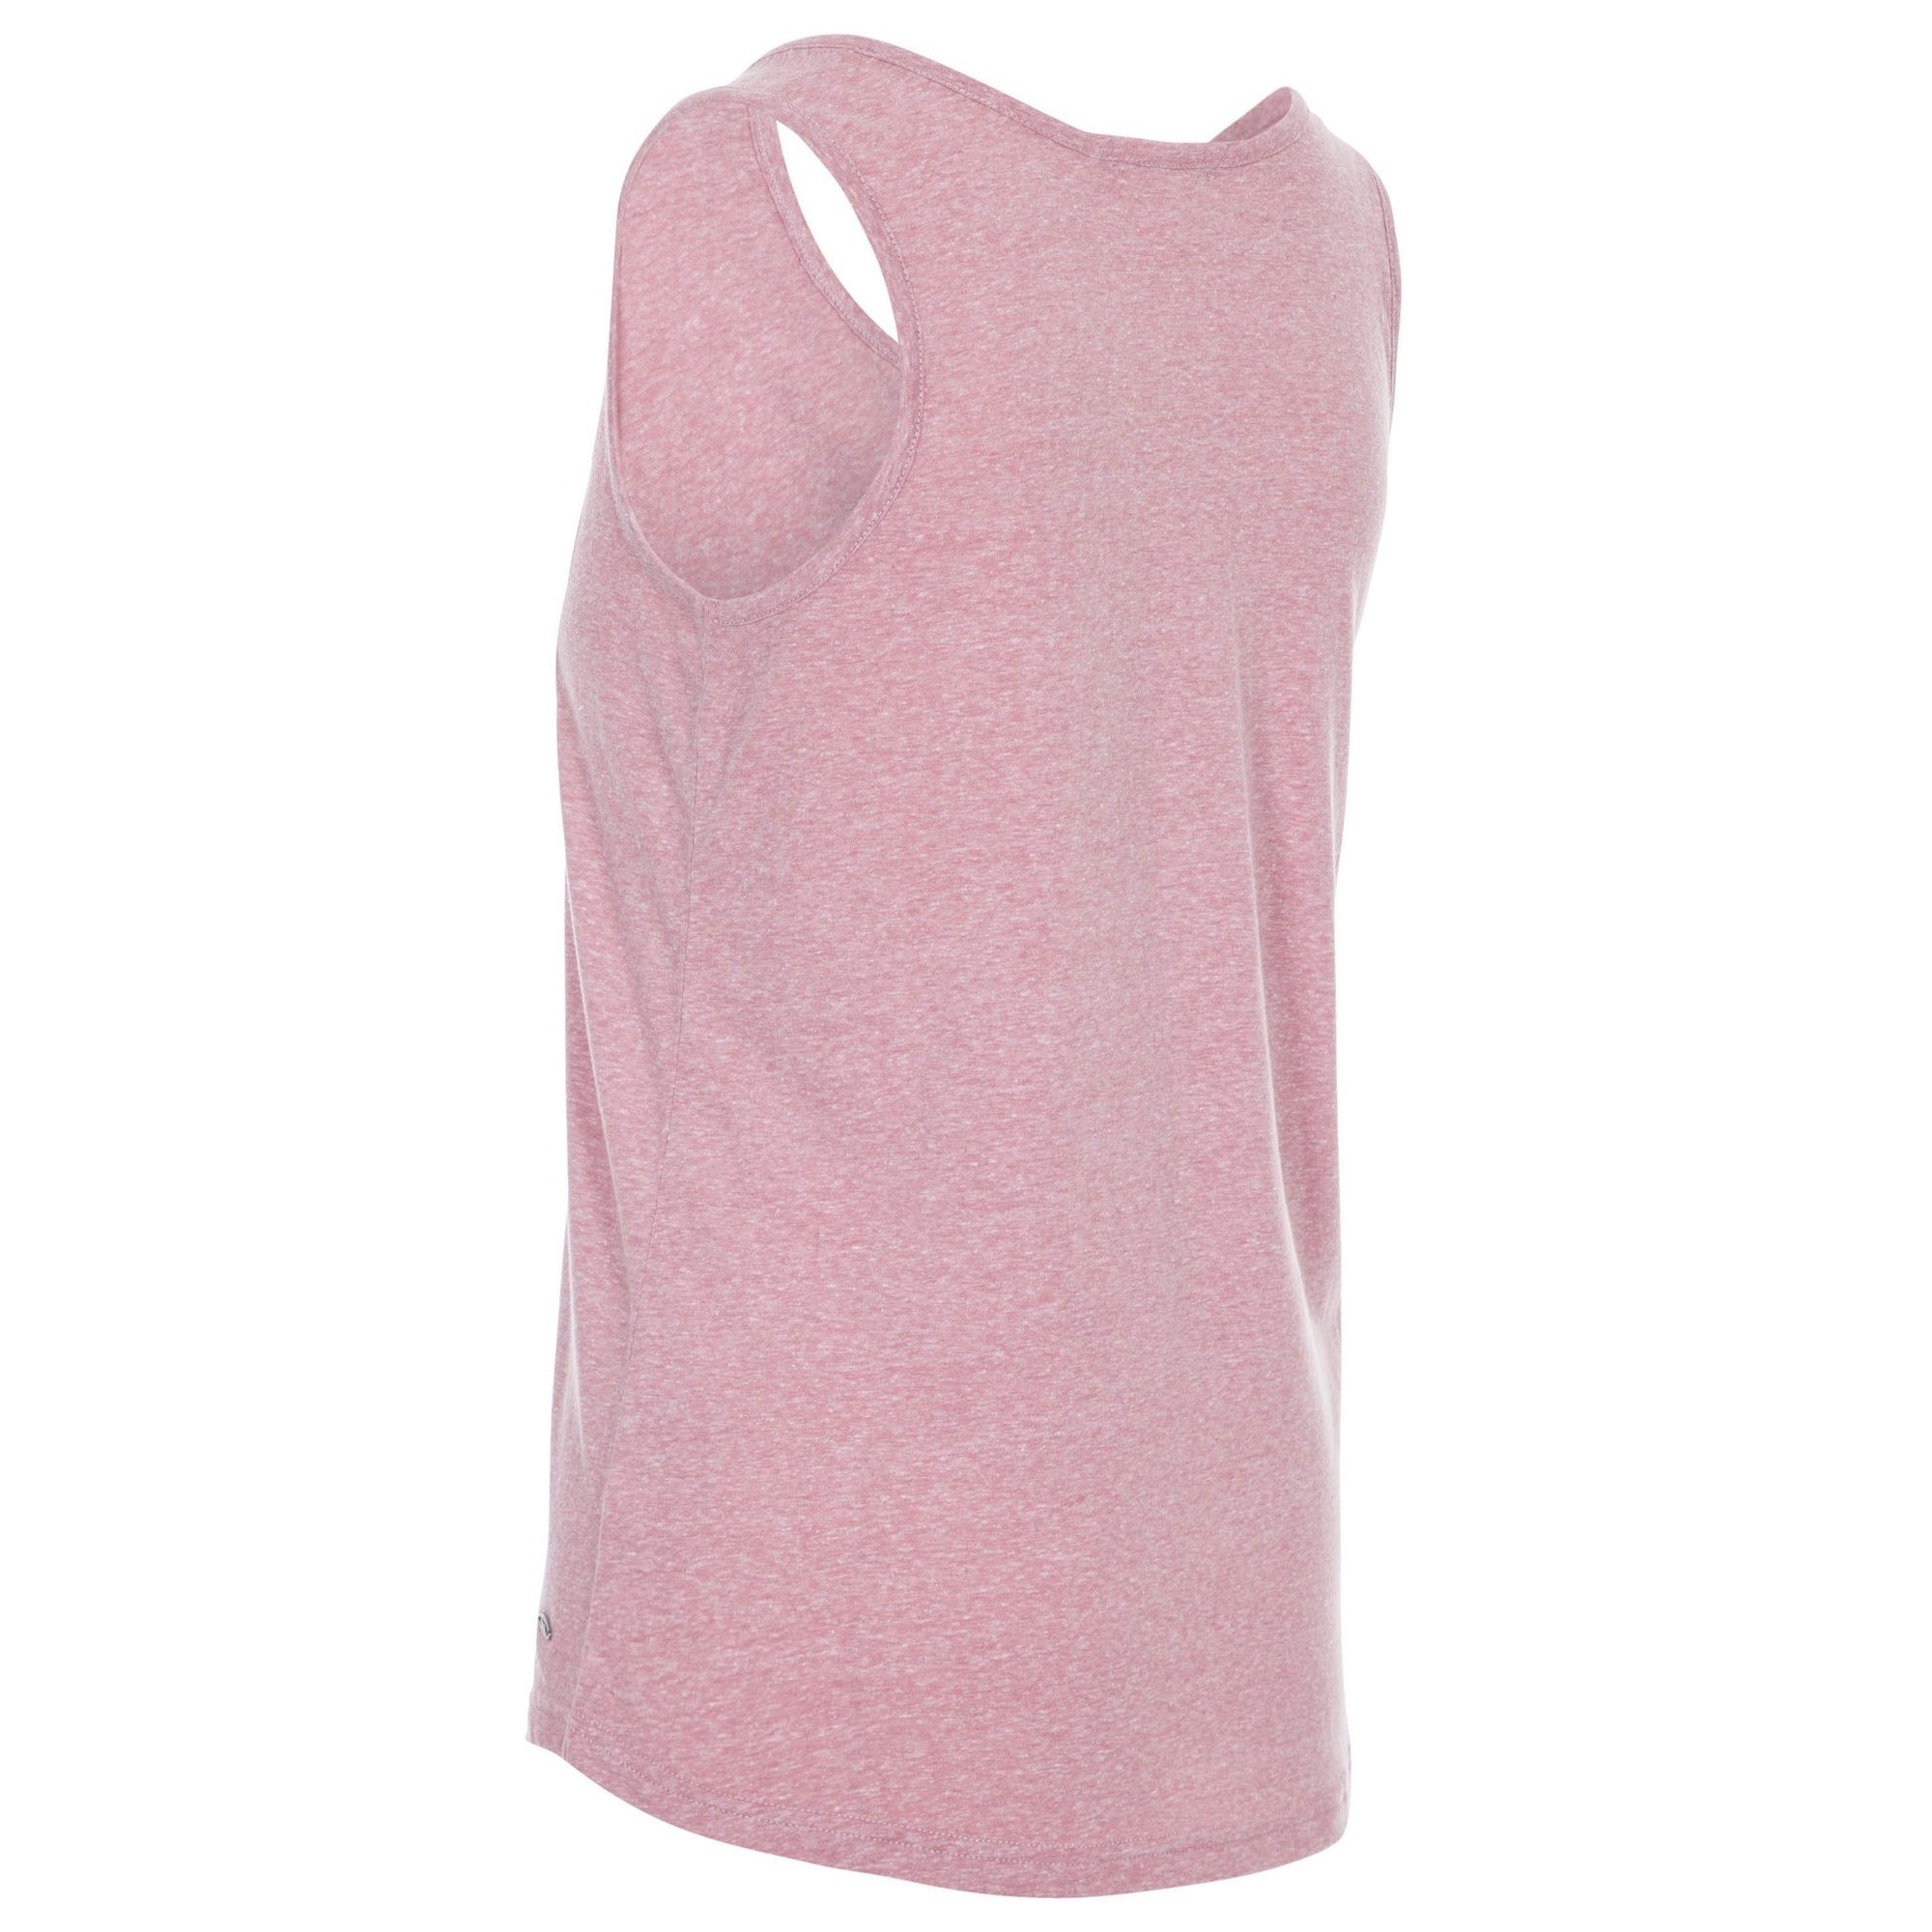 Sleeveless vest top with front pocket. Curved hem shape. Matching bindings. Soft pleat at front neck. 50% polyester, 38% cotton, 12% viscose. Trespass Womens Chest Sizing (approx): XS/8 - 32in/81cm, S/10 - 34in/86cm, M/12 - 36in/91.4cm, L/14 - 38in/96.5cm, XL/16 - 40in/101.5cm, XXL/18 - 42in/106.5cm.